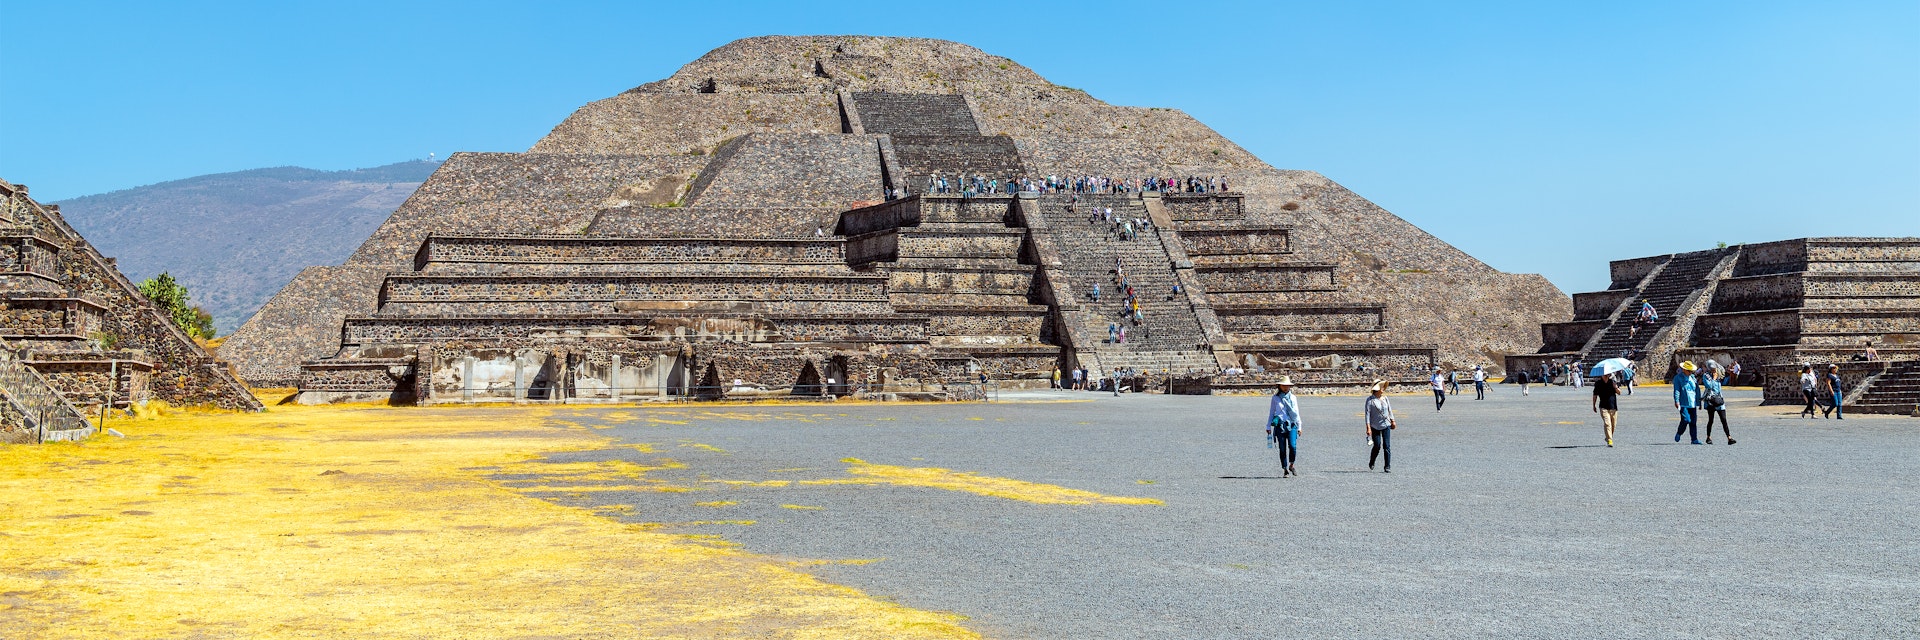 Pyramid of the Moon, Teotihuacan, Mexico.